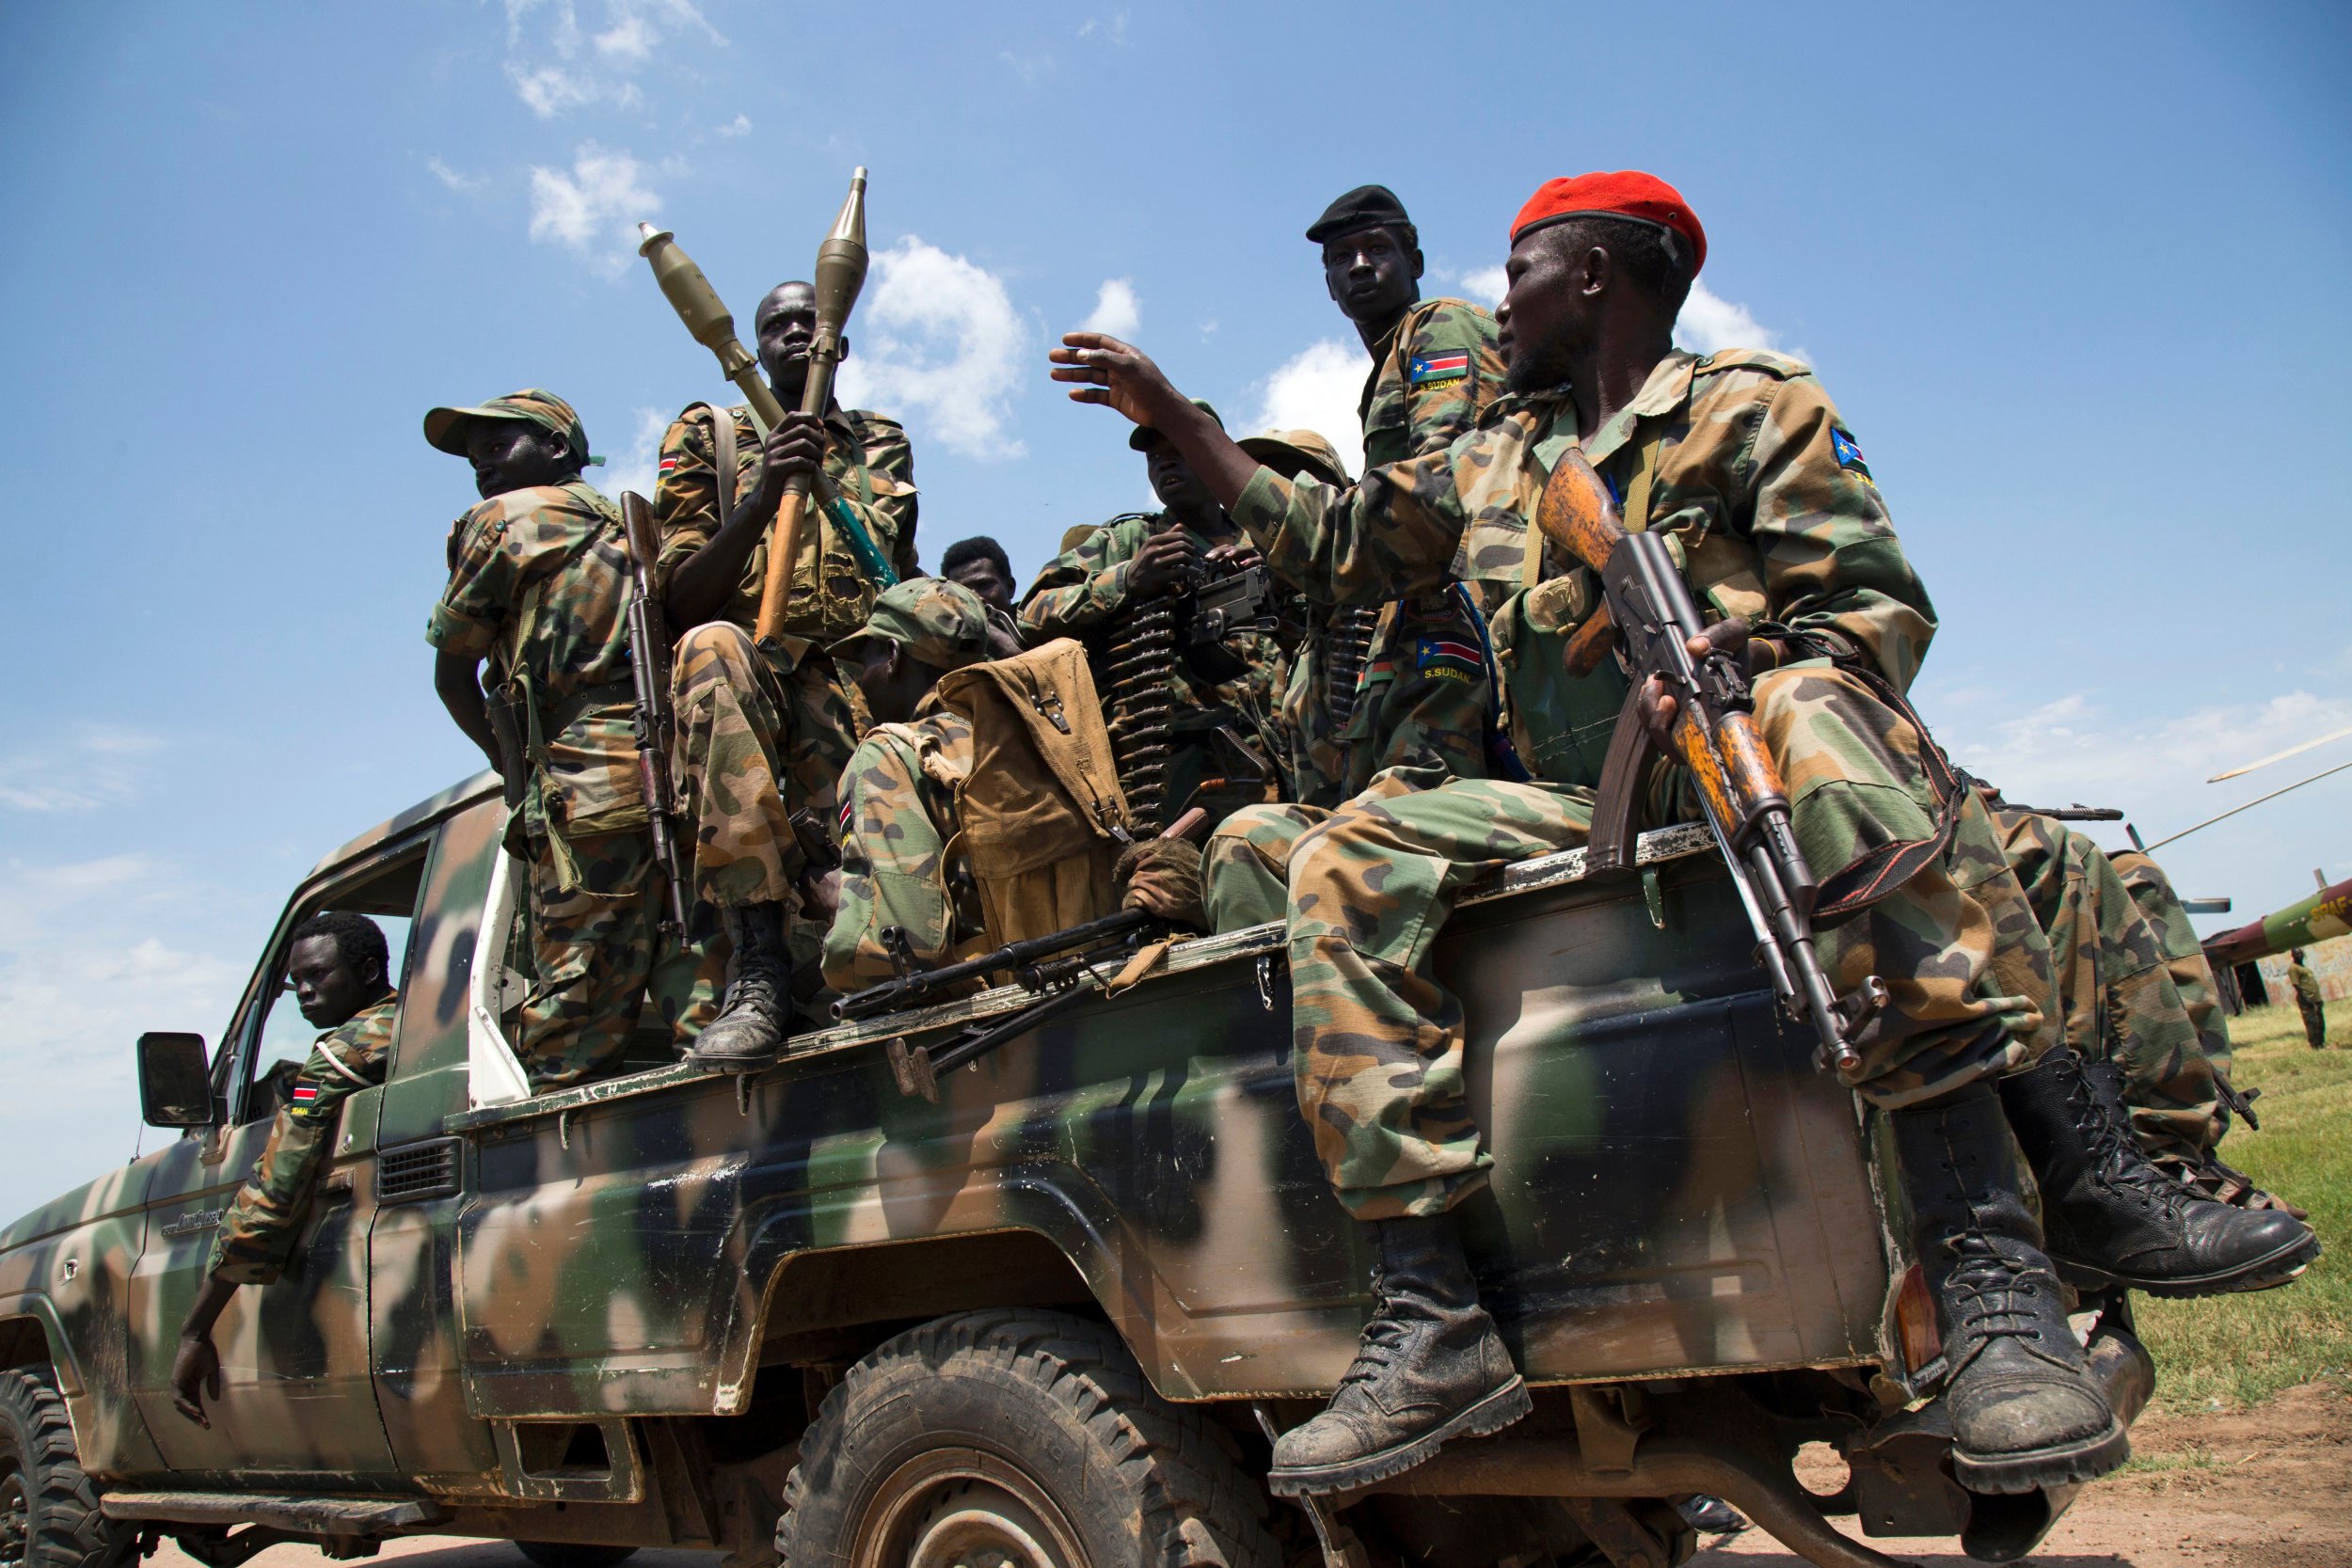 South Sudanese government soldiers sit in a pick-up truck at the military base in Malakal, northern South Sudan, on October 16, 2016.